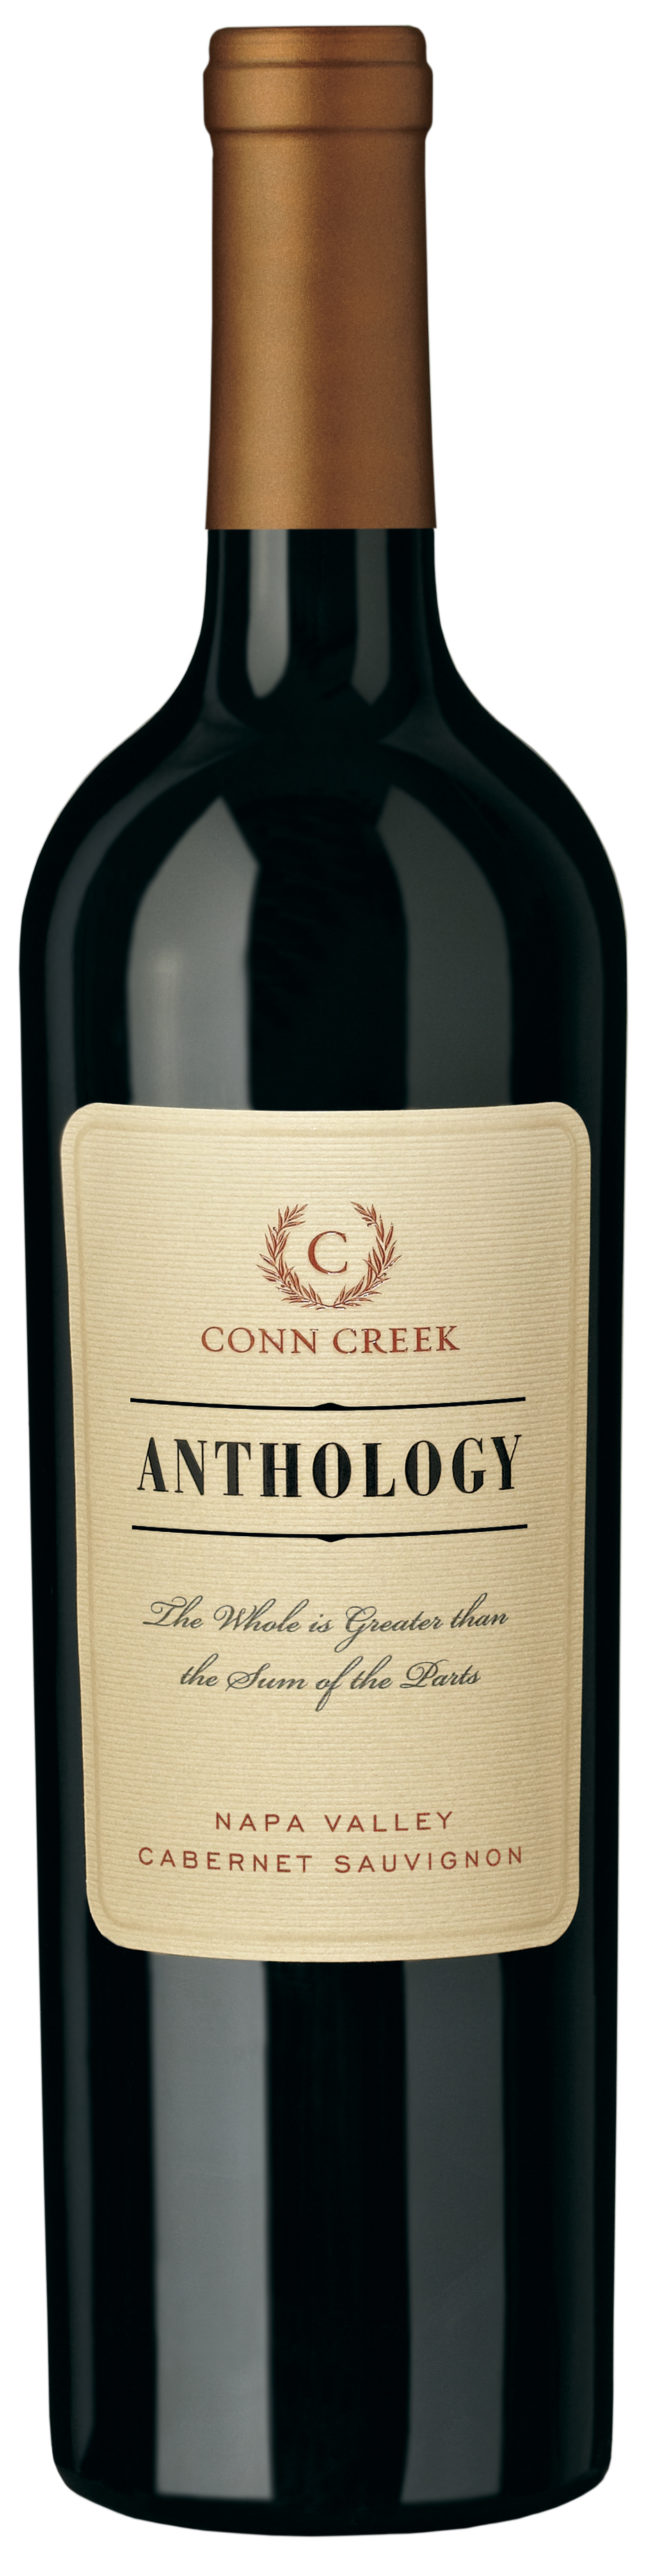 CA Wine Month Case Discount on Conn Creek Wines